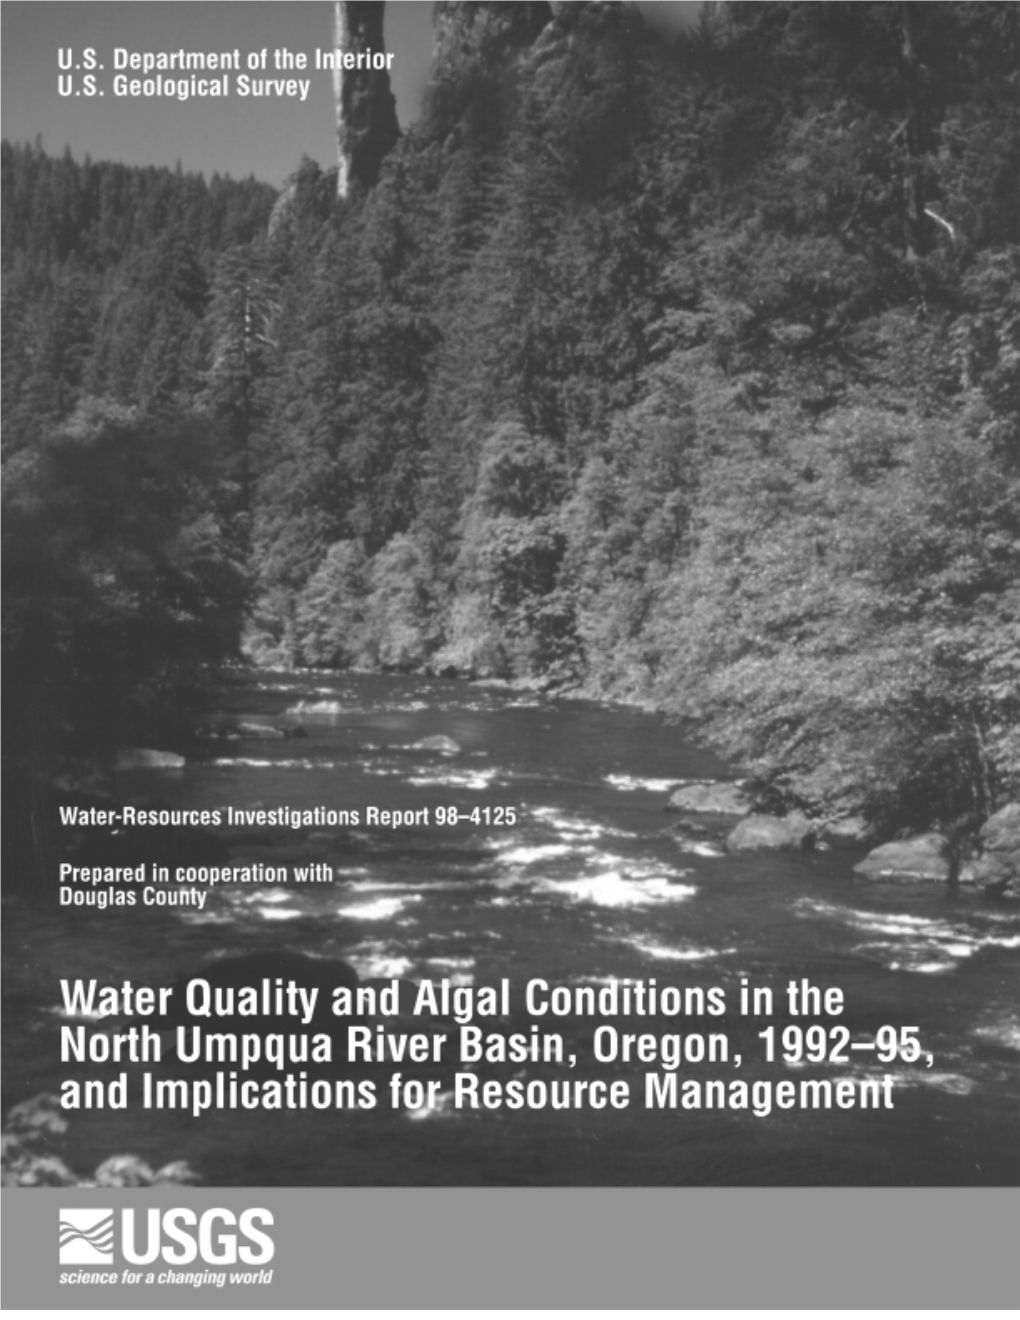 Water Quality and Algal Conditions in the North Umpqua River Basin, Oregon, 1992–95, and Implications for Resource Management